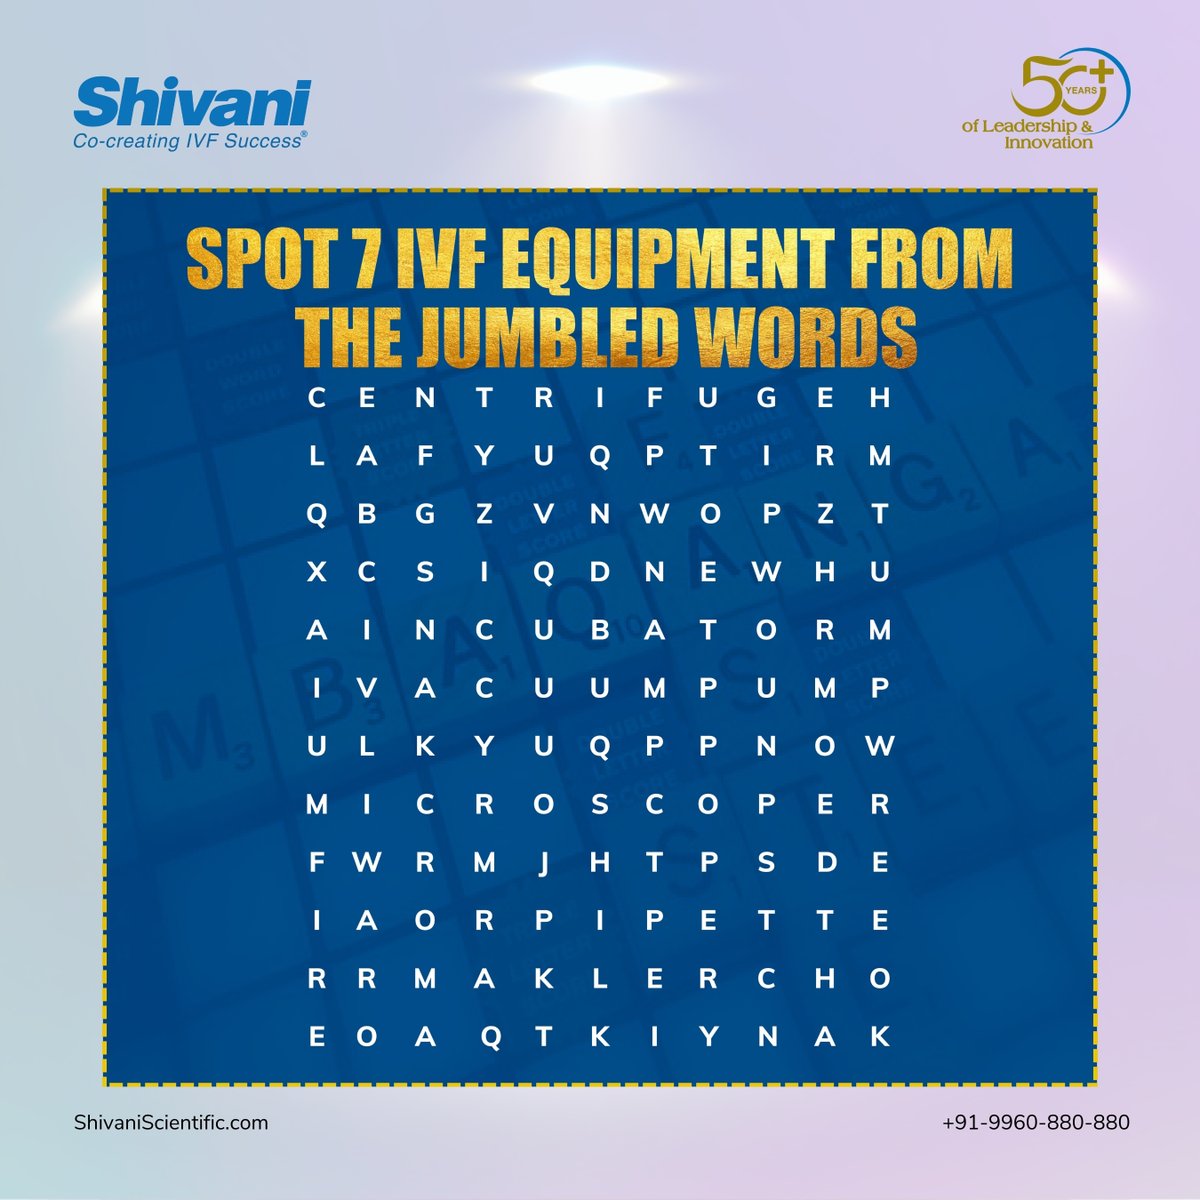 🔍 Can you decode the scrambled words to uncover the 7 vital IVF equipment pieces? 🧩 Share your answers in the comments section! 
#shivaniivf
#mindsetforsuccess
#ShivaniScientific
#cocreatingivfsuccess
#ivfknowledge
#ivfchallenge
#ivfequipment